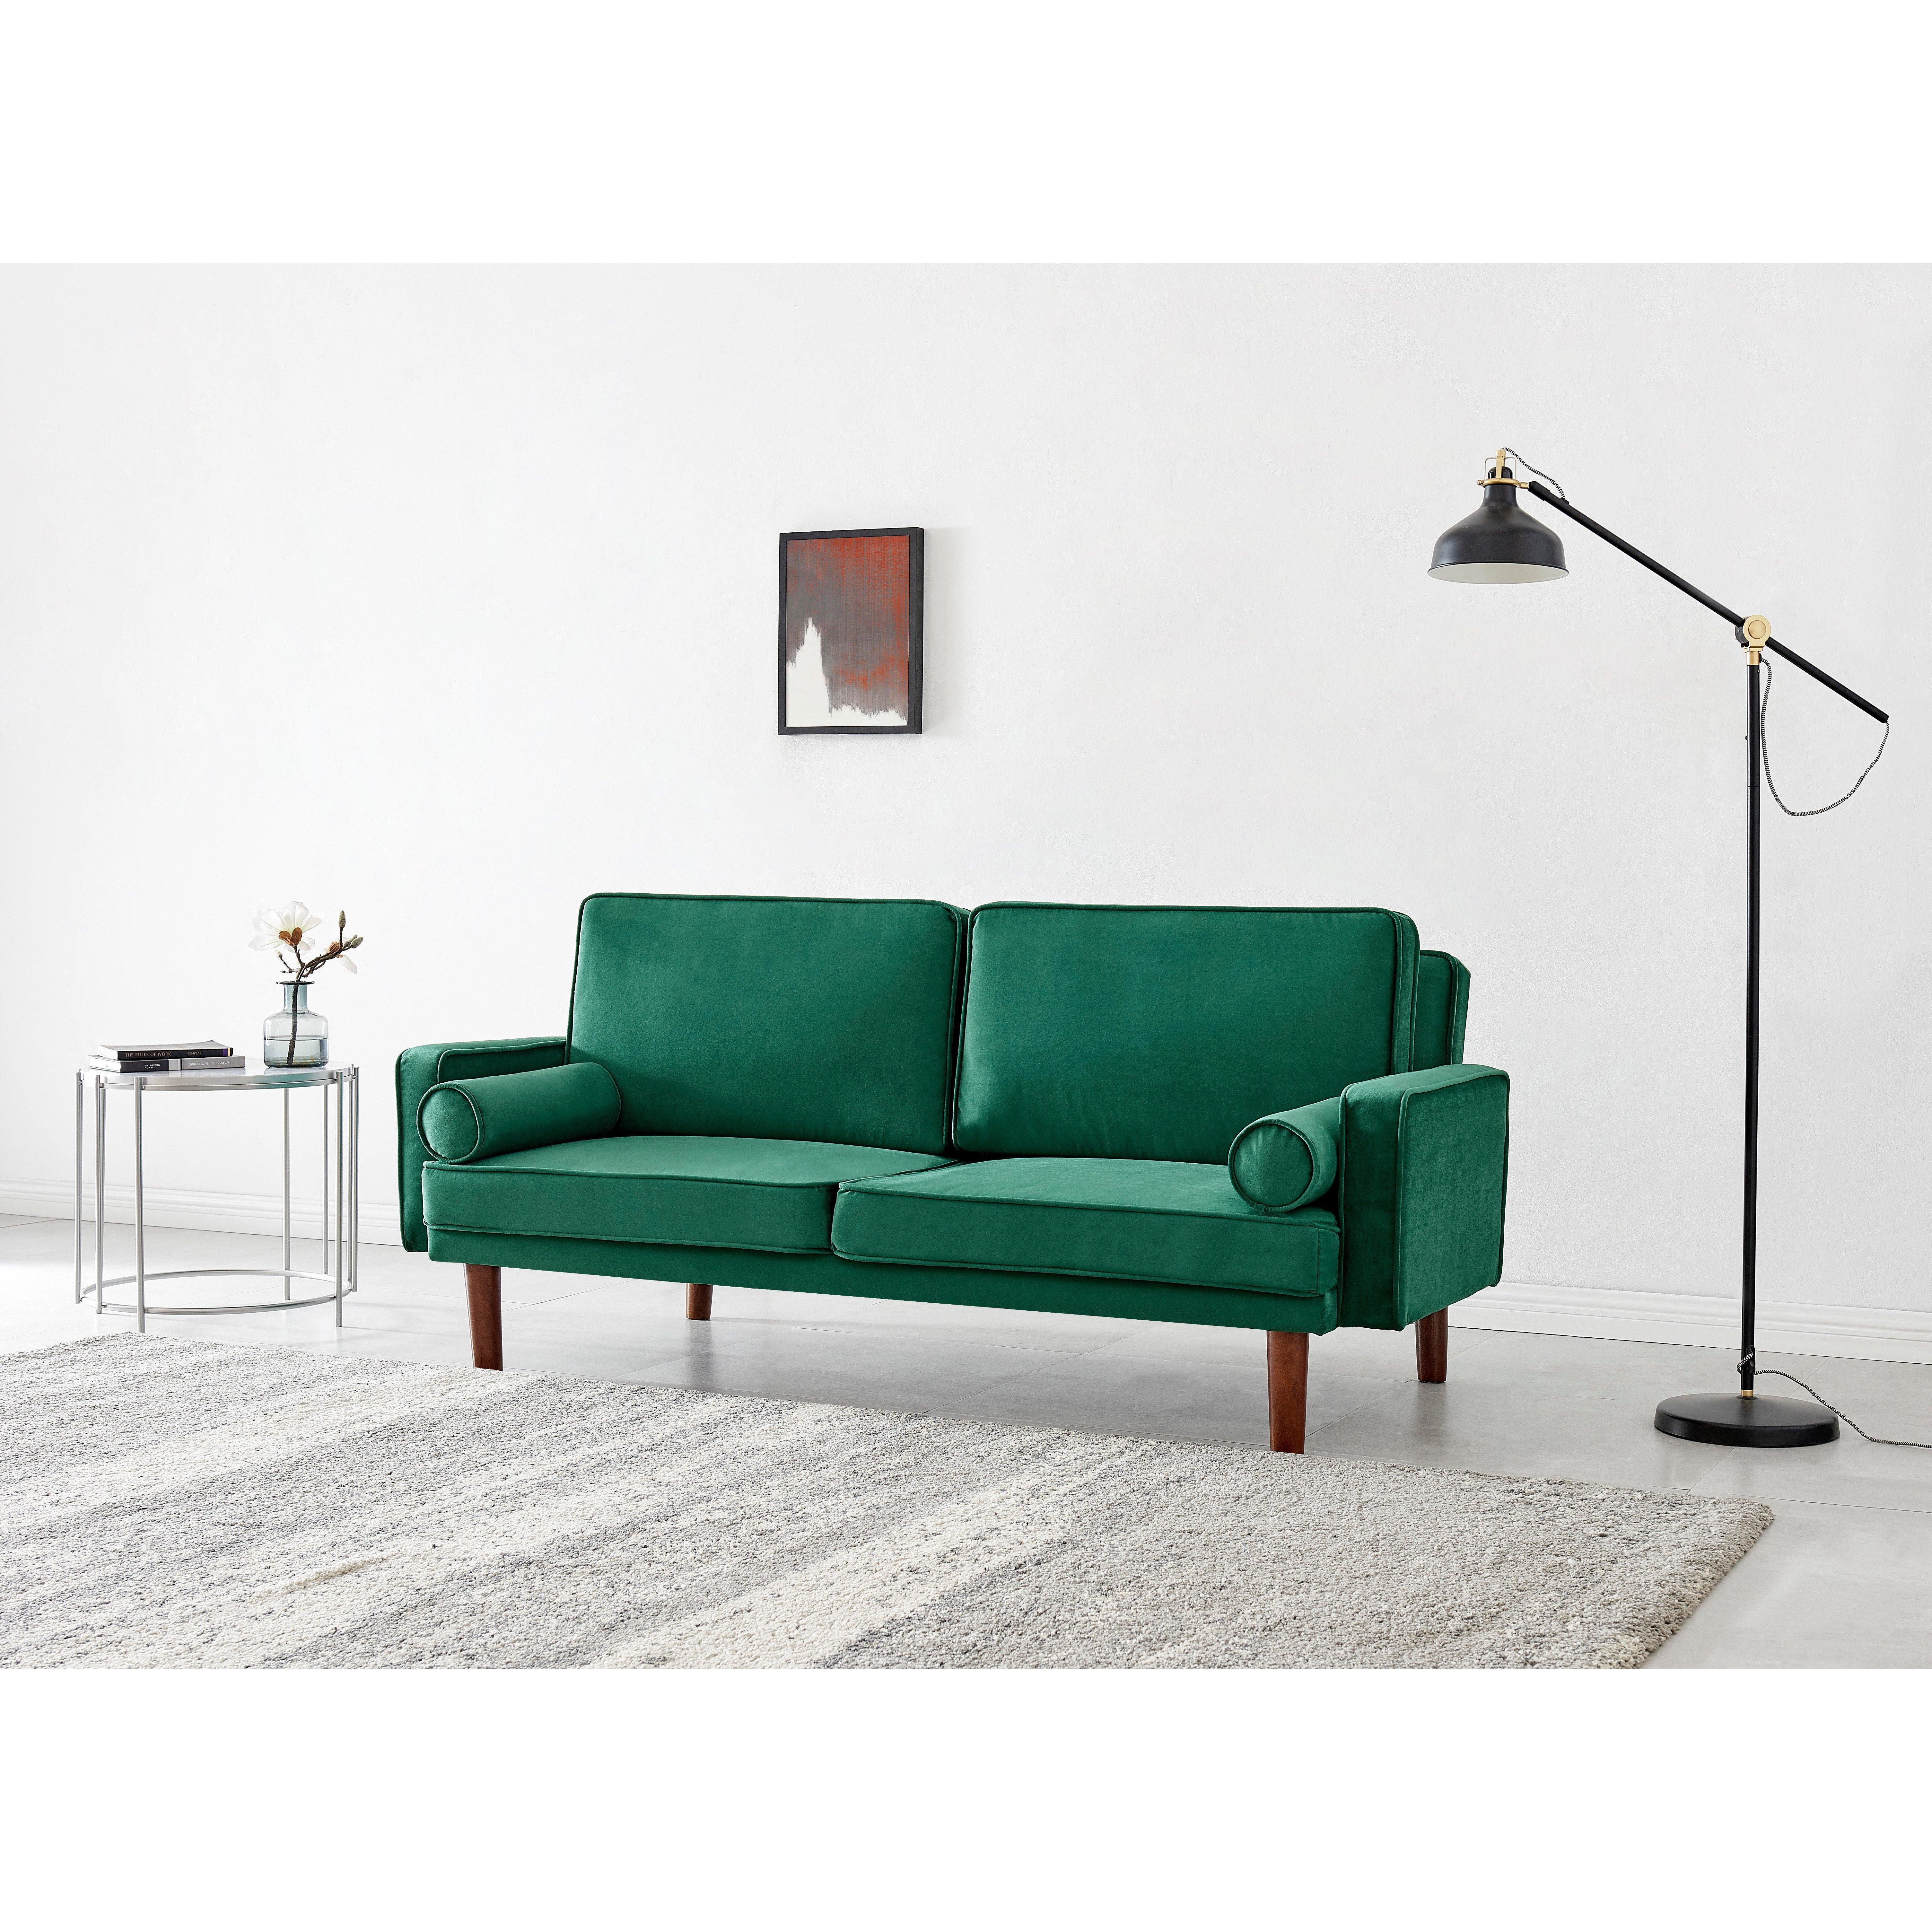 Sutton Velvet Sofa bed with Wooden Legs - image 1